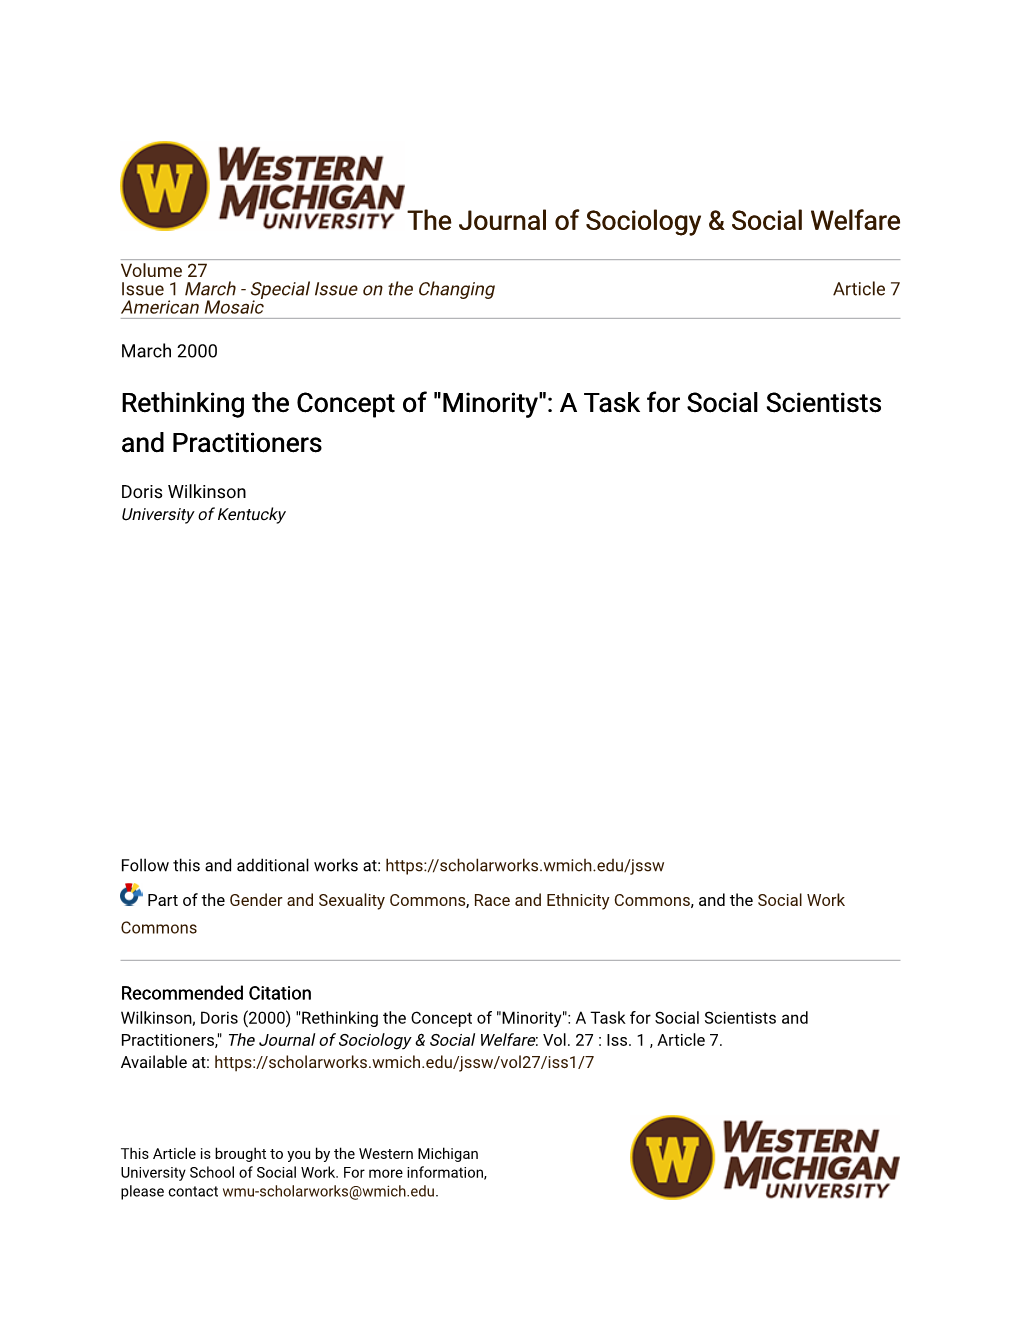 Rethinking the Concept of "Minority": a Task for Social Scientists and Practitioners